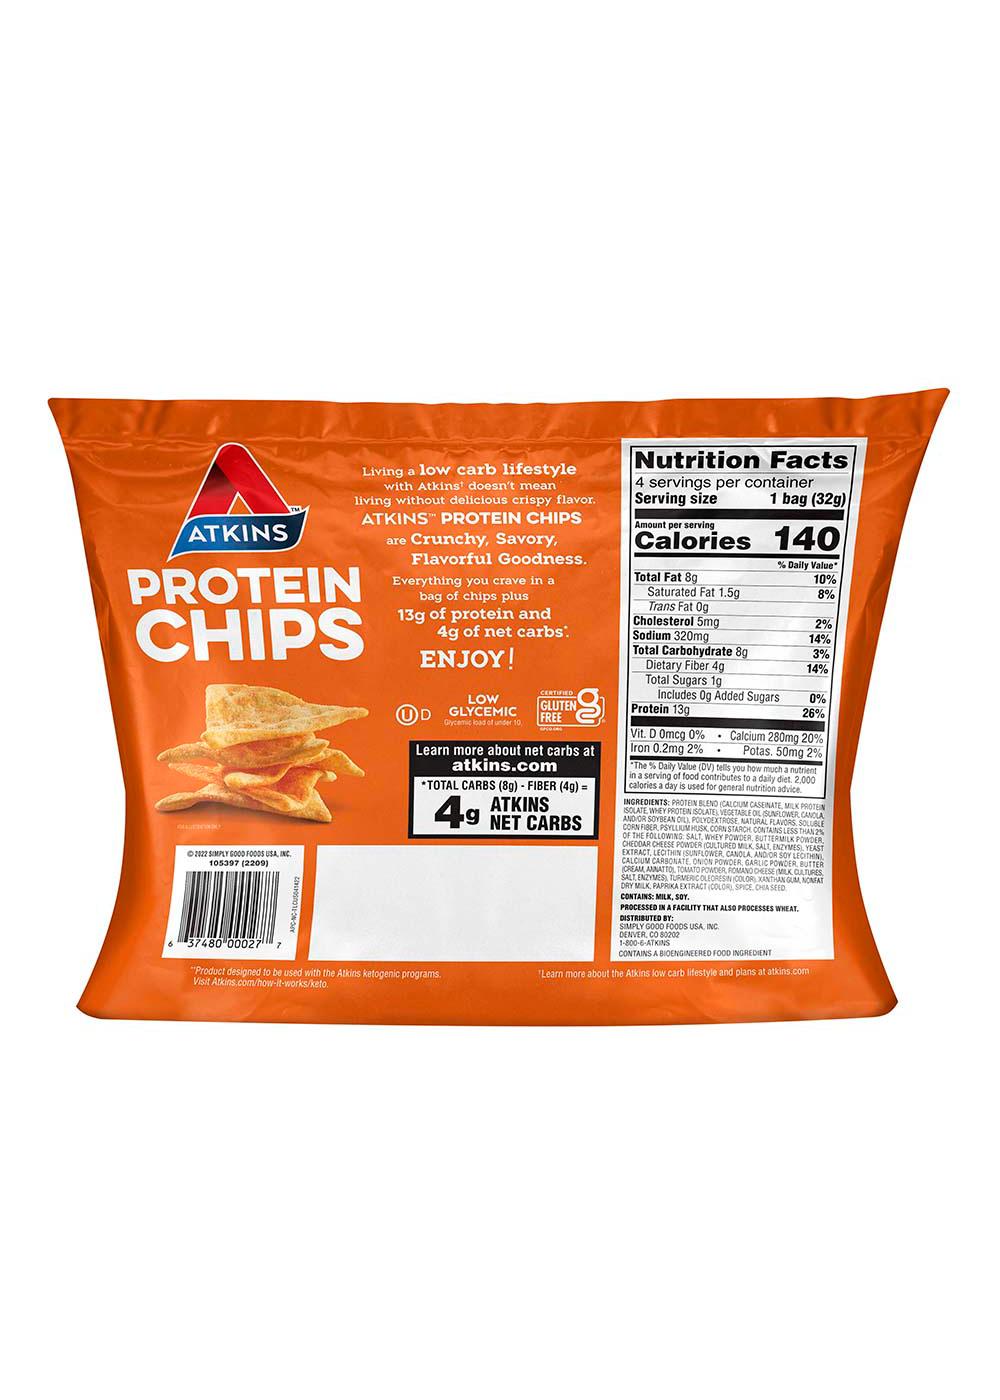 Atkins Protein Chips - Nacho Cheese; image 2 of 2